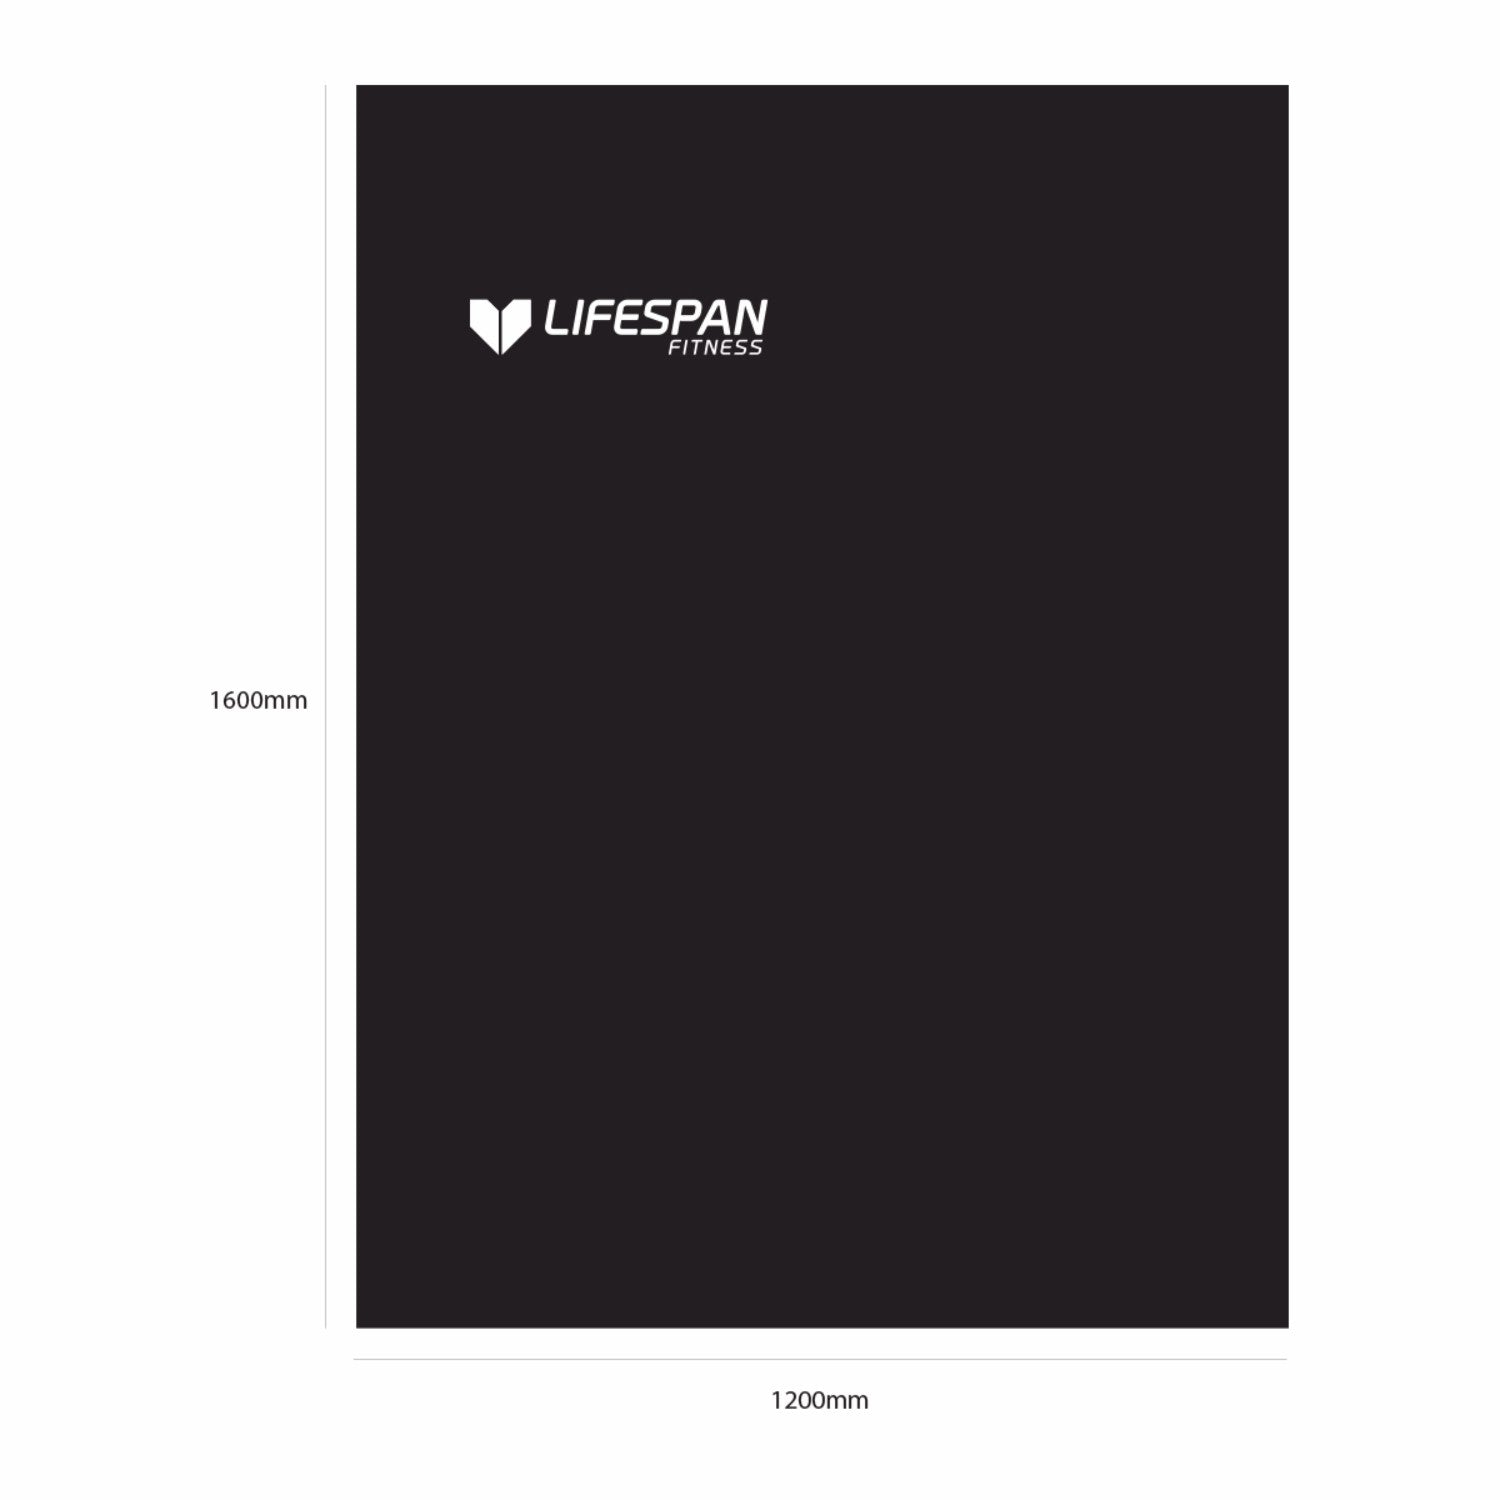 Lifespan Fitness Treadmill Cover Large